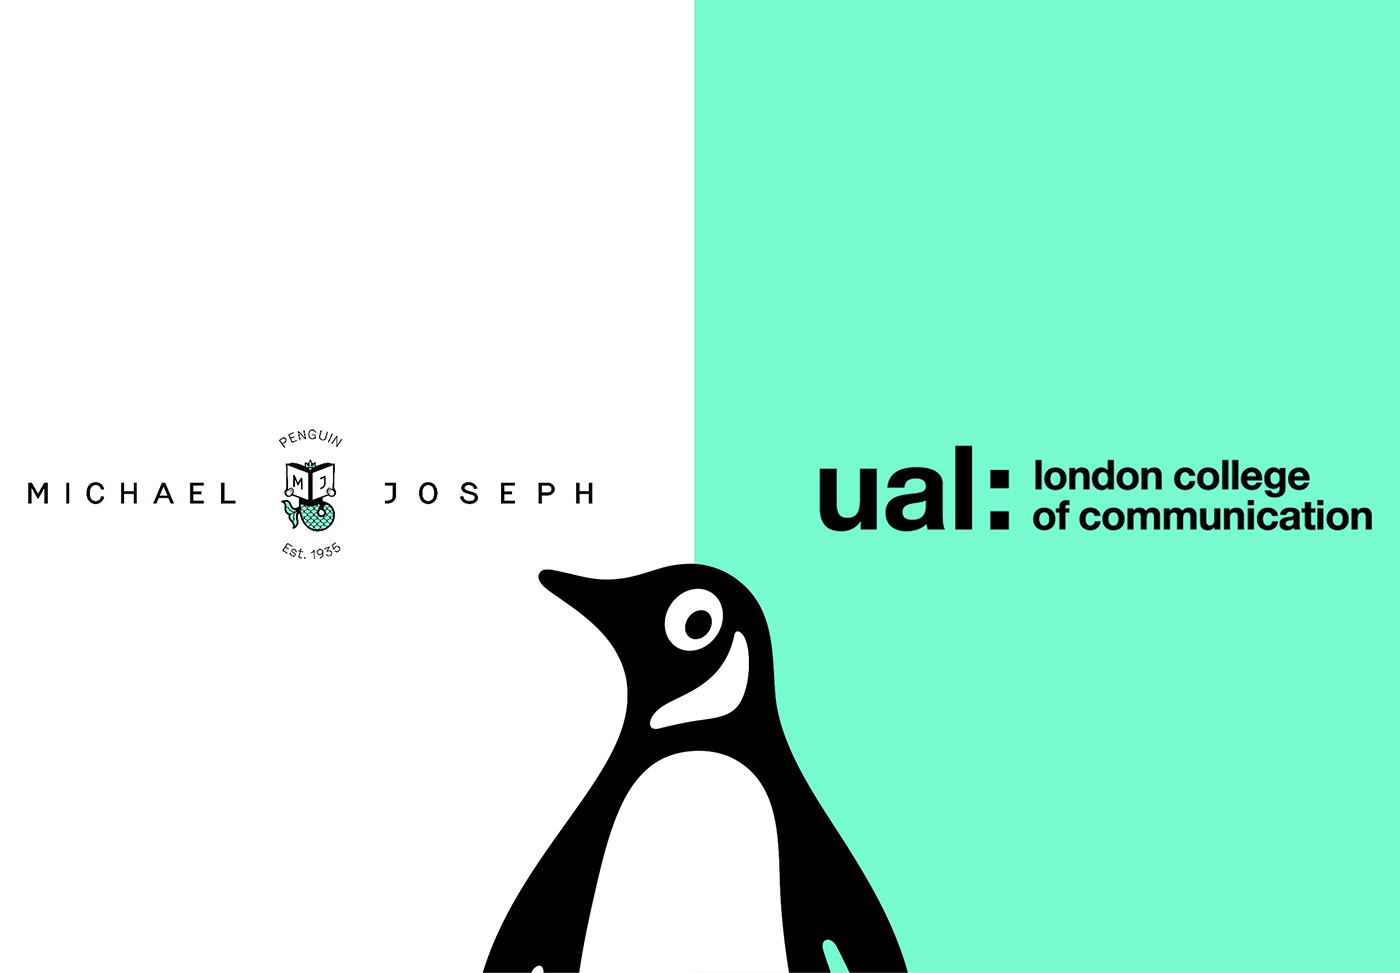 A banner featuring logos from Penguin Michael Joseph and London College of Communication.